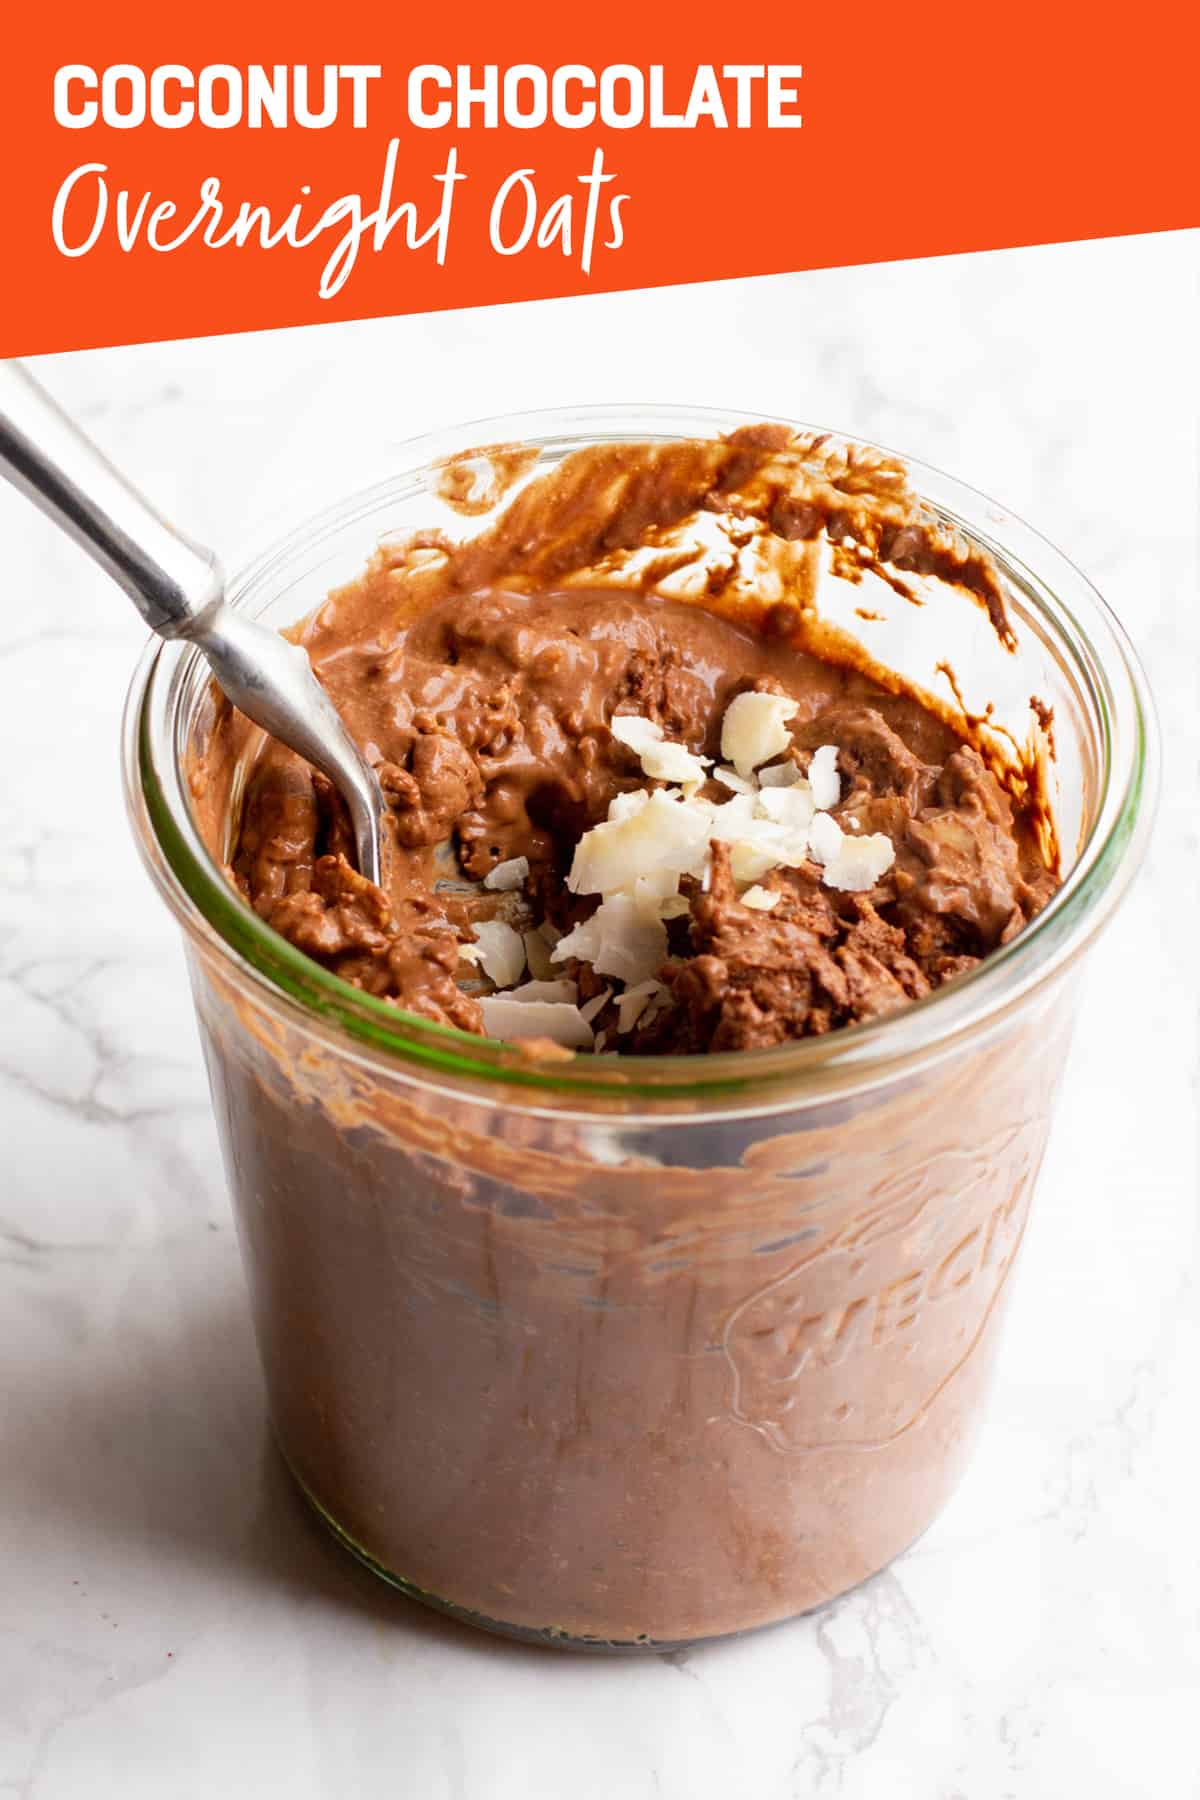 A clear glass jar filled with chocolate coconut overnight oats, with a spoon sticking out. A text overlay reads "Coconut Chocolate Overnight Oats."